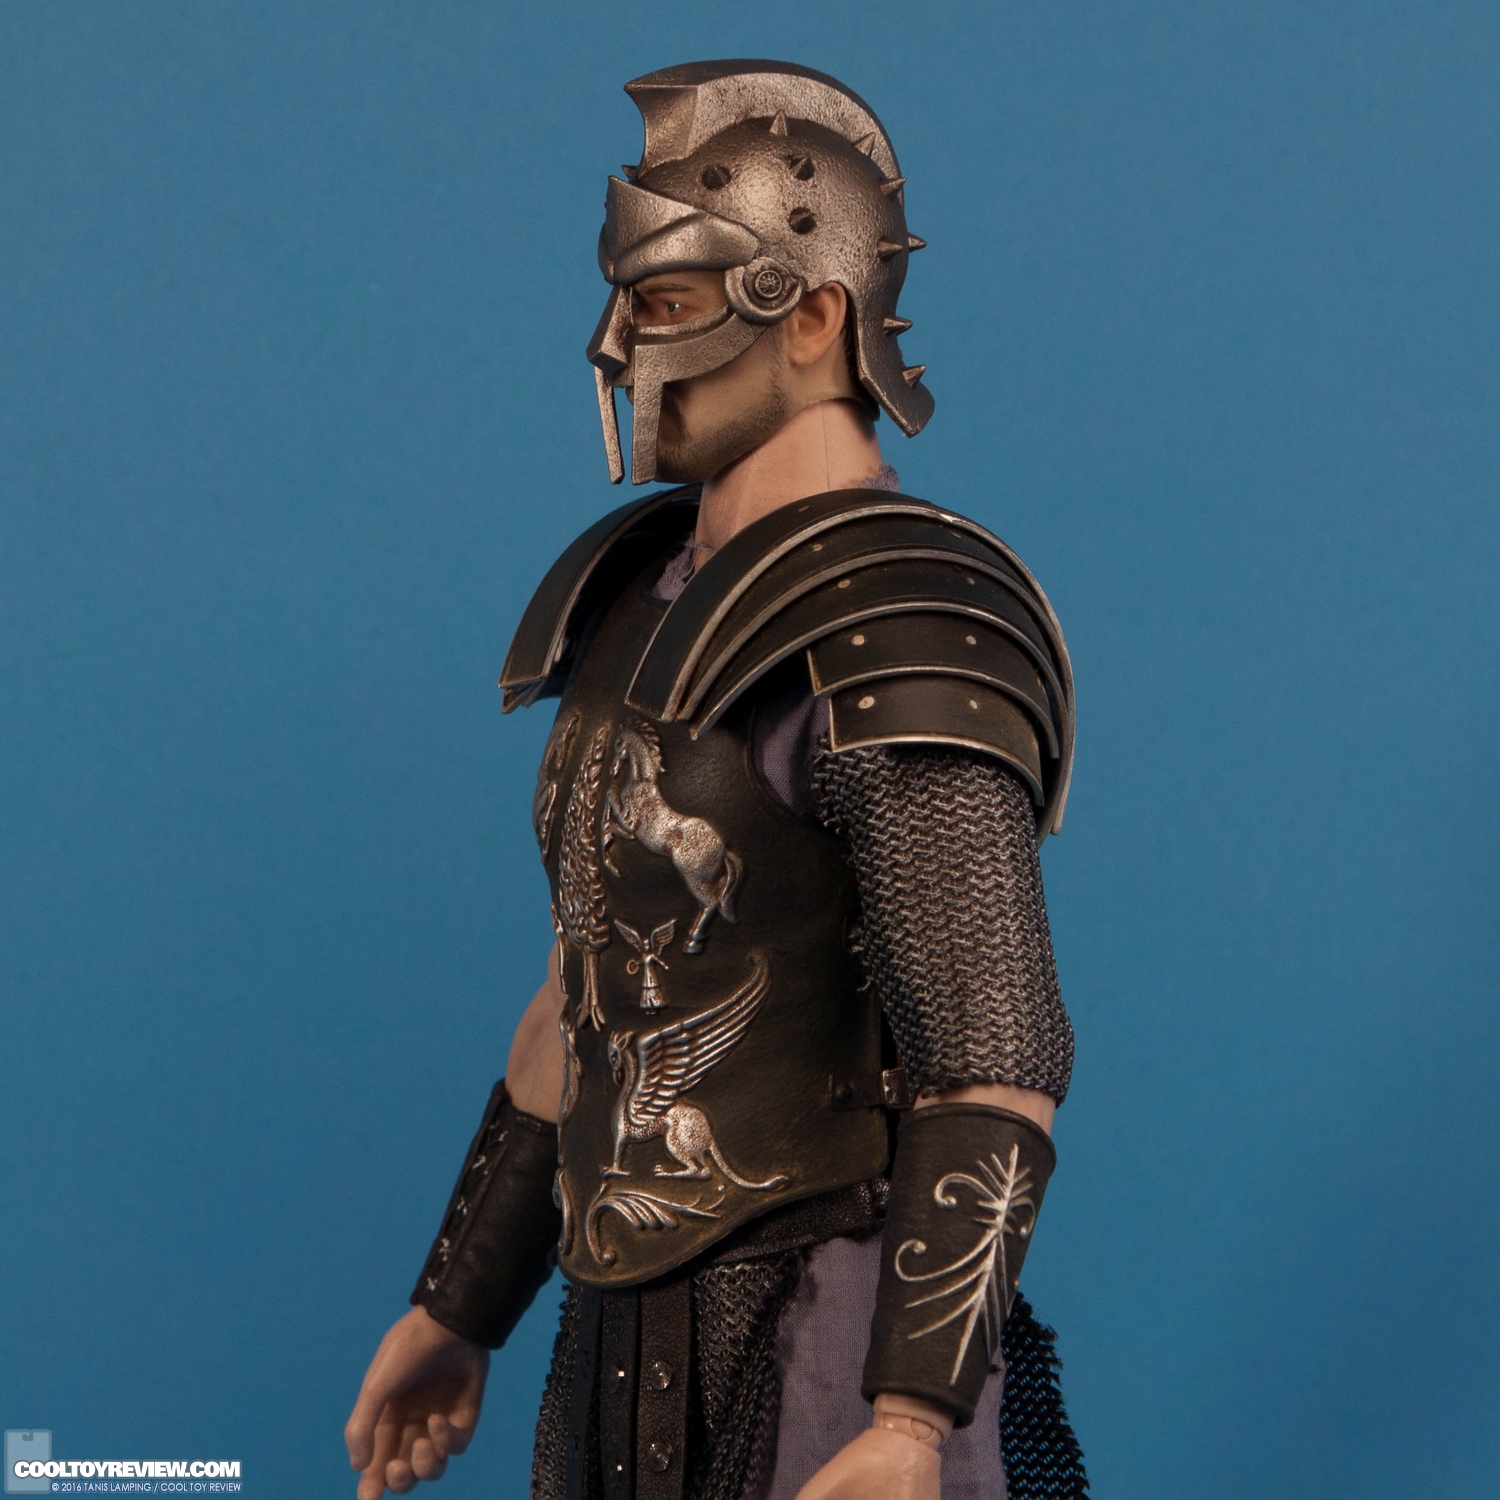 pangaea-toy-gladiator-general-sixth-scale-collectible-figure-015.jpg